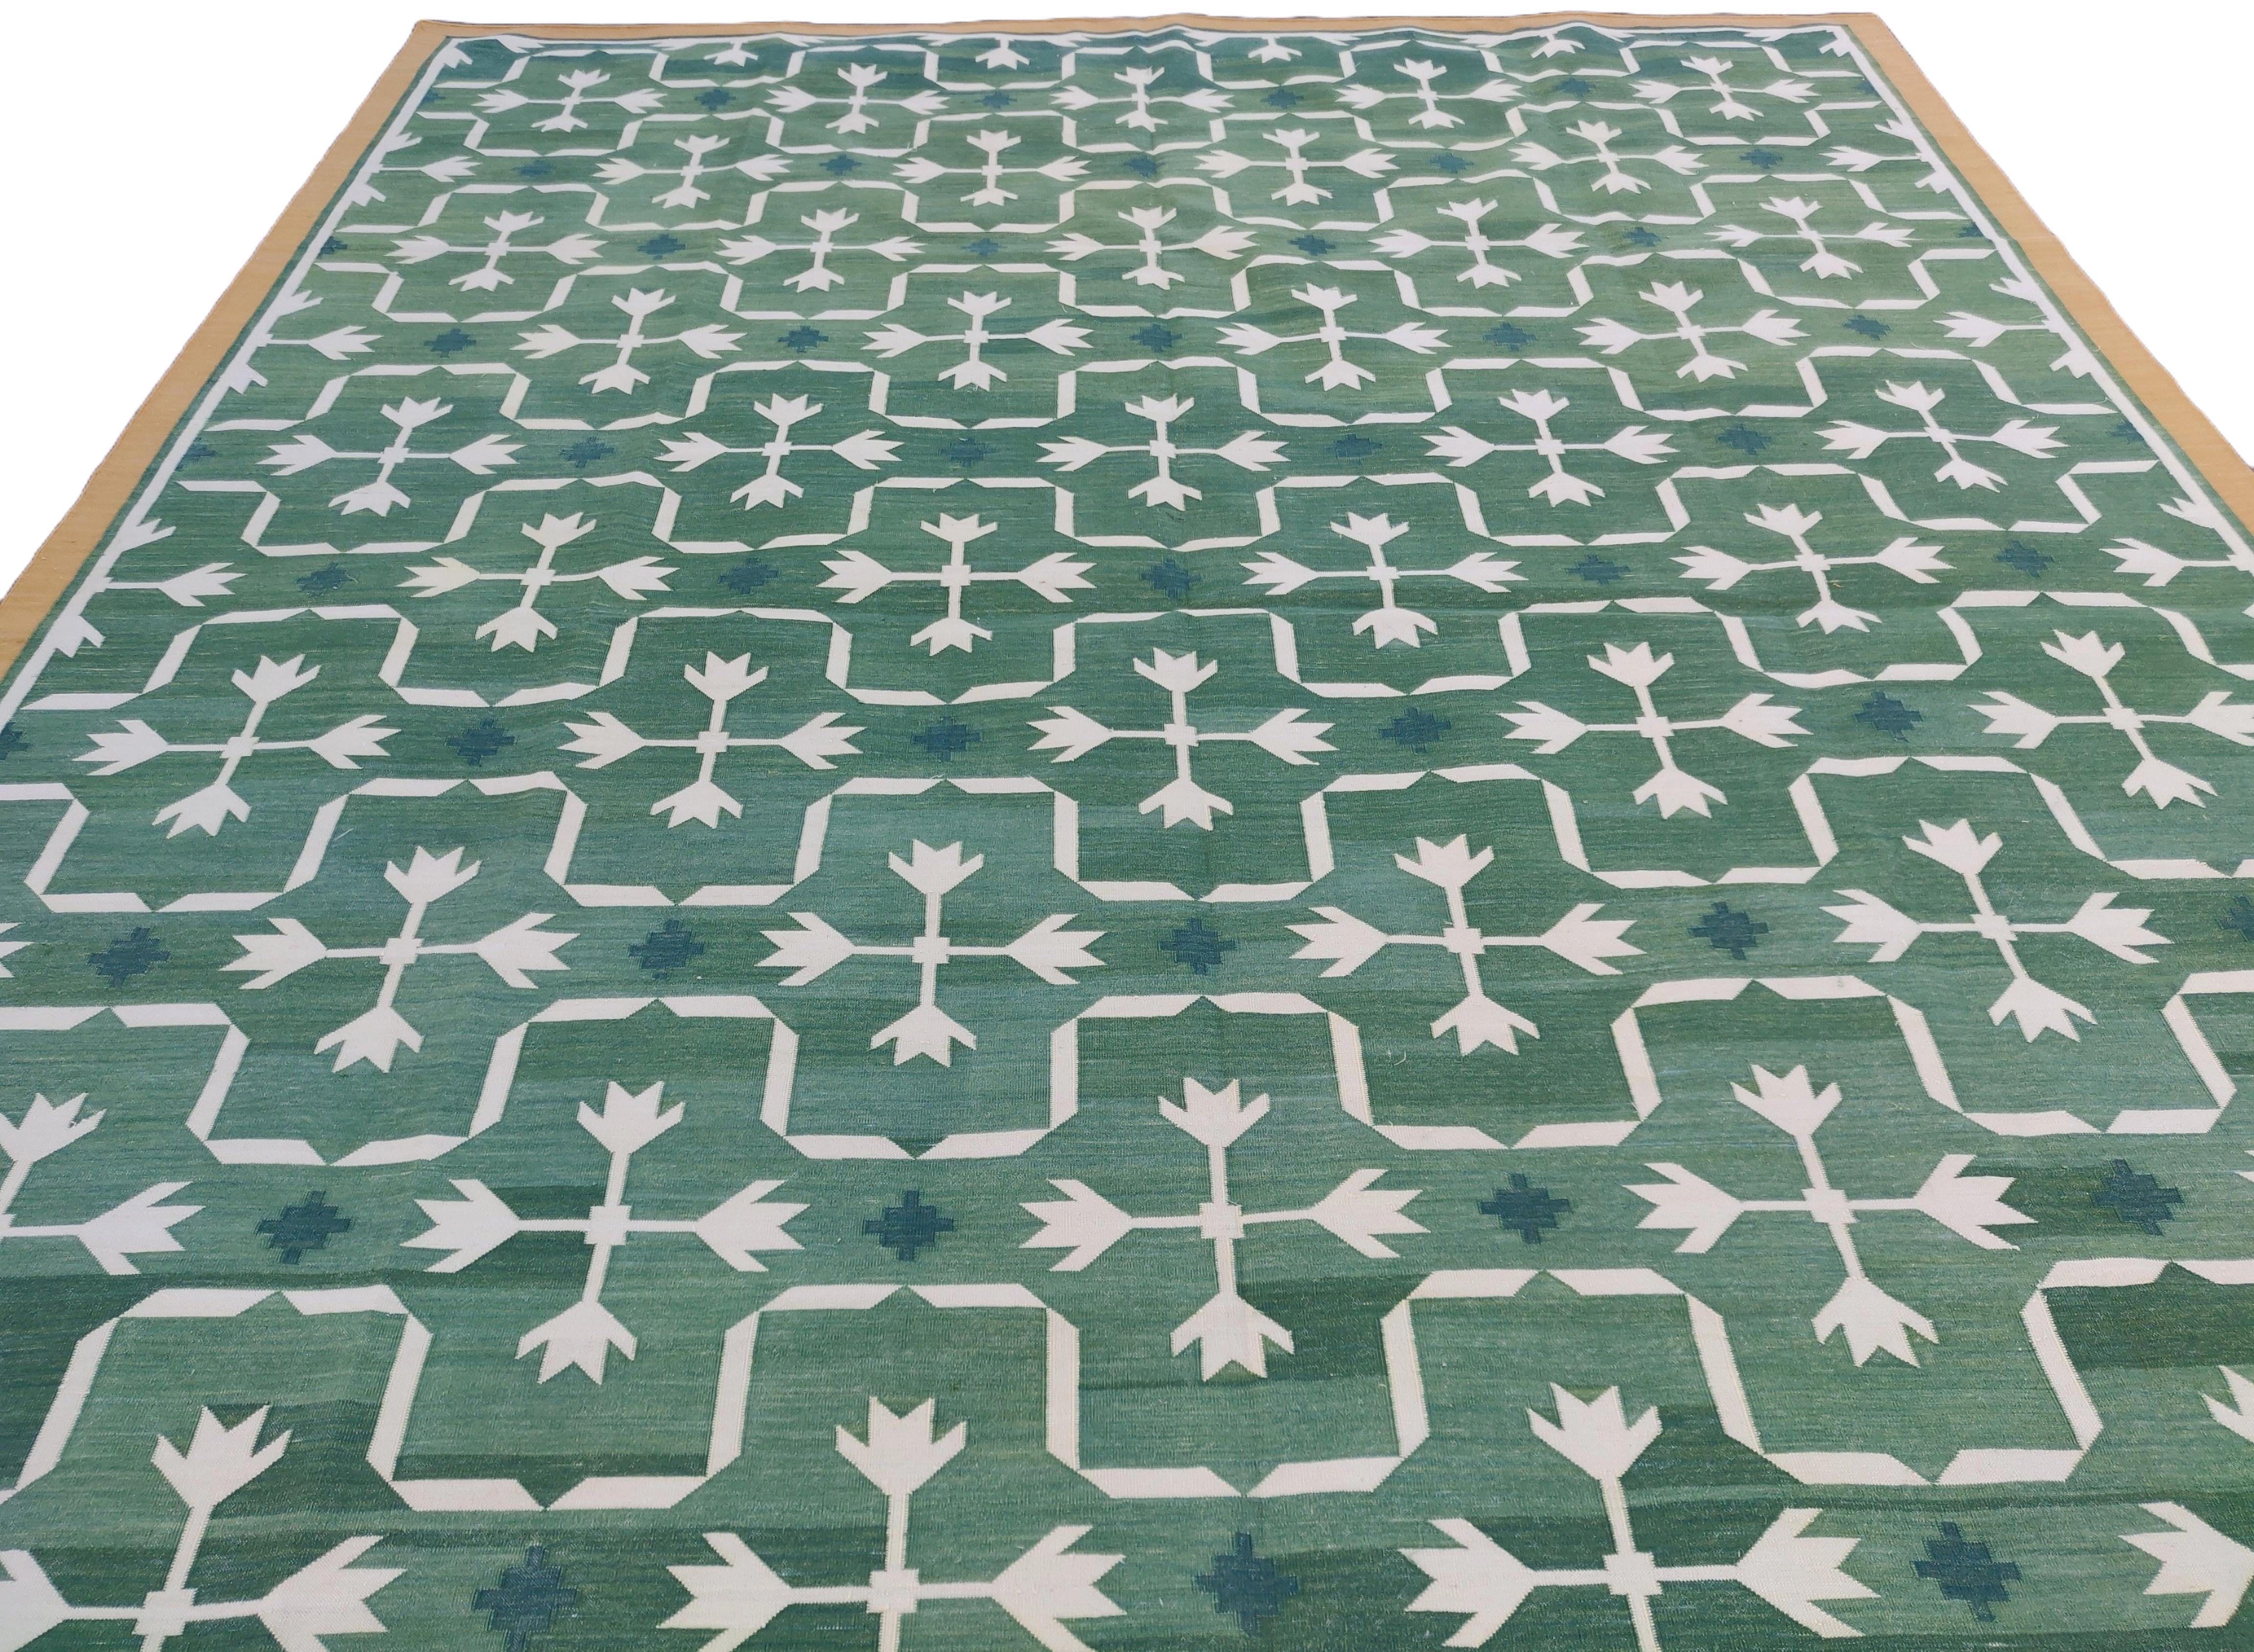 Cotton Vegetable Dyed Reversible Forest Green, Cream And Yellow Leaf Patterned Indian Rug - 8'x10'
These special flat-weave dhurries are hand-woven with 15 ply 100% cotton yarn. Due to the special manufacturing techniques used to create our rugs,